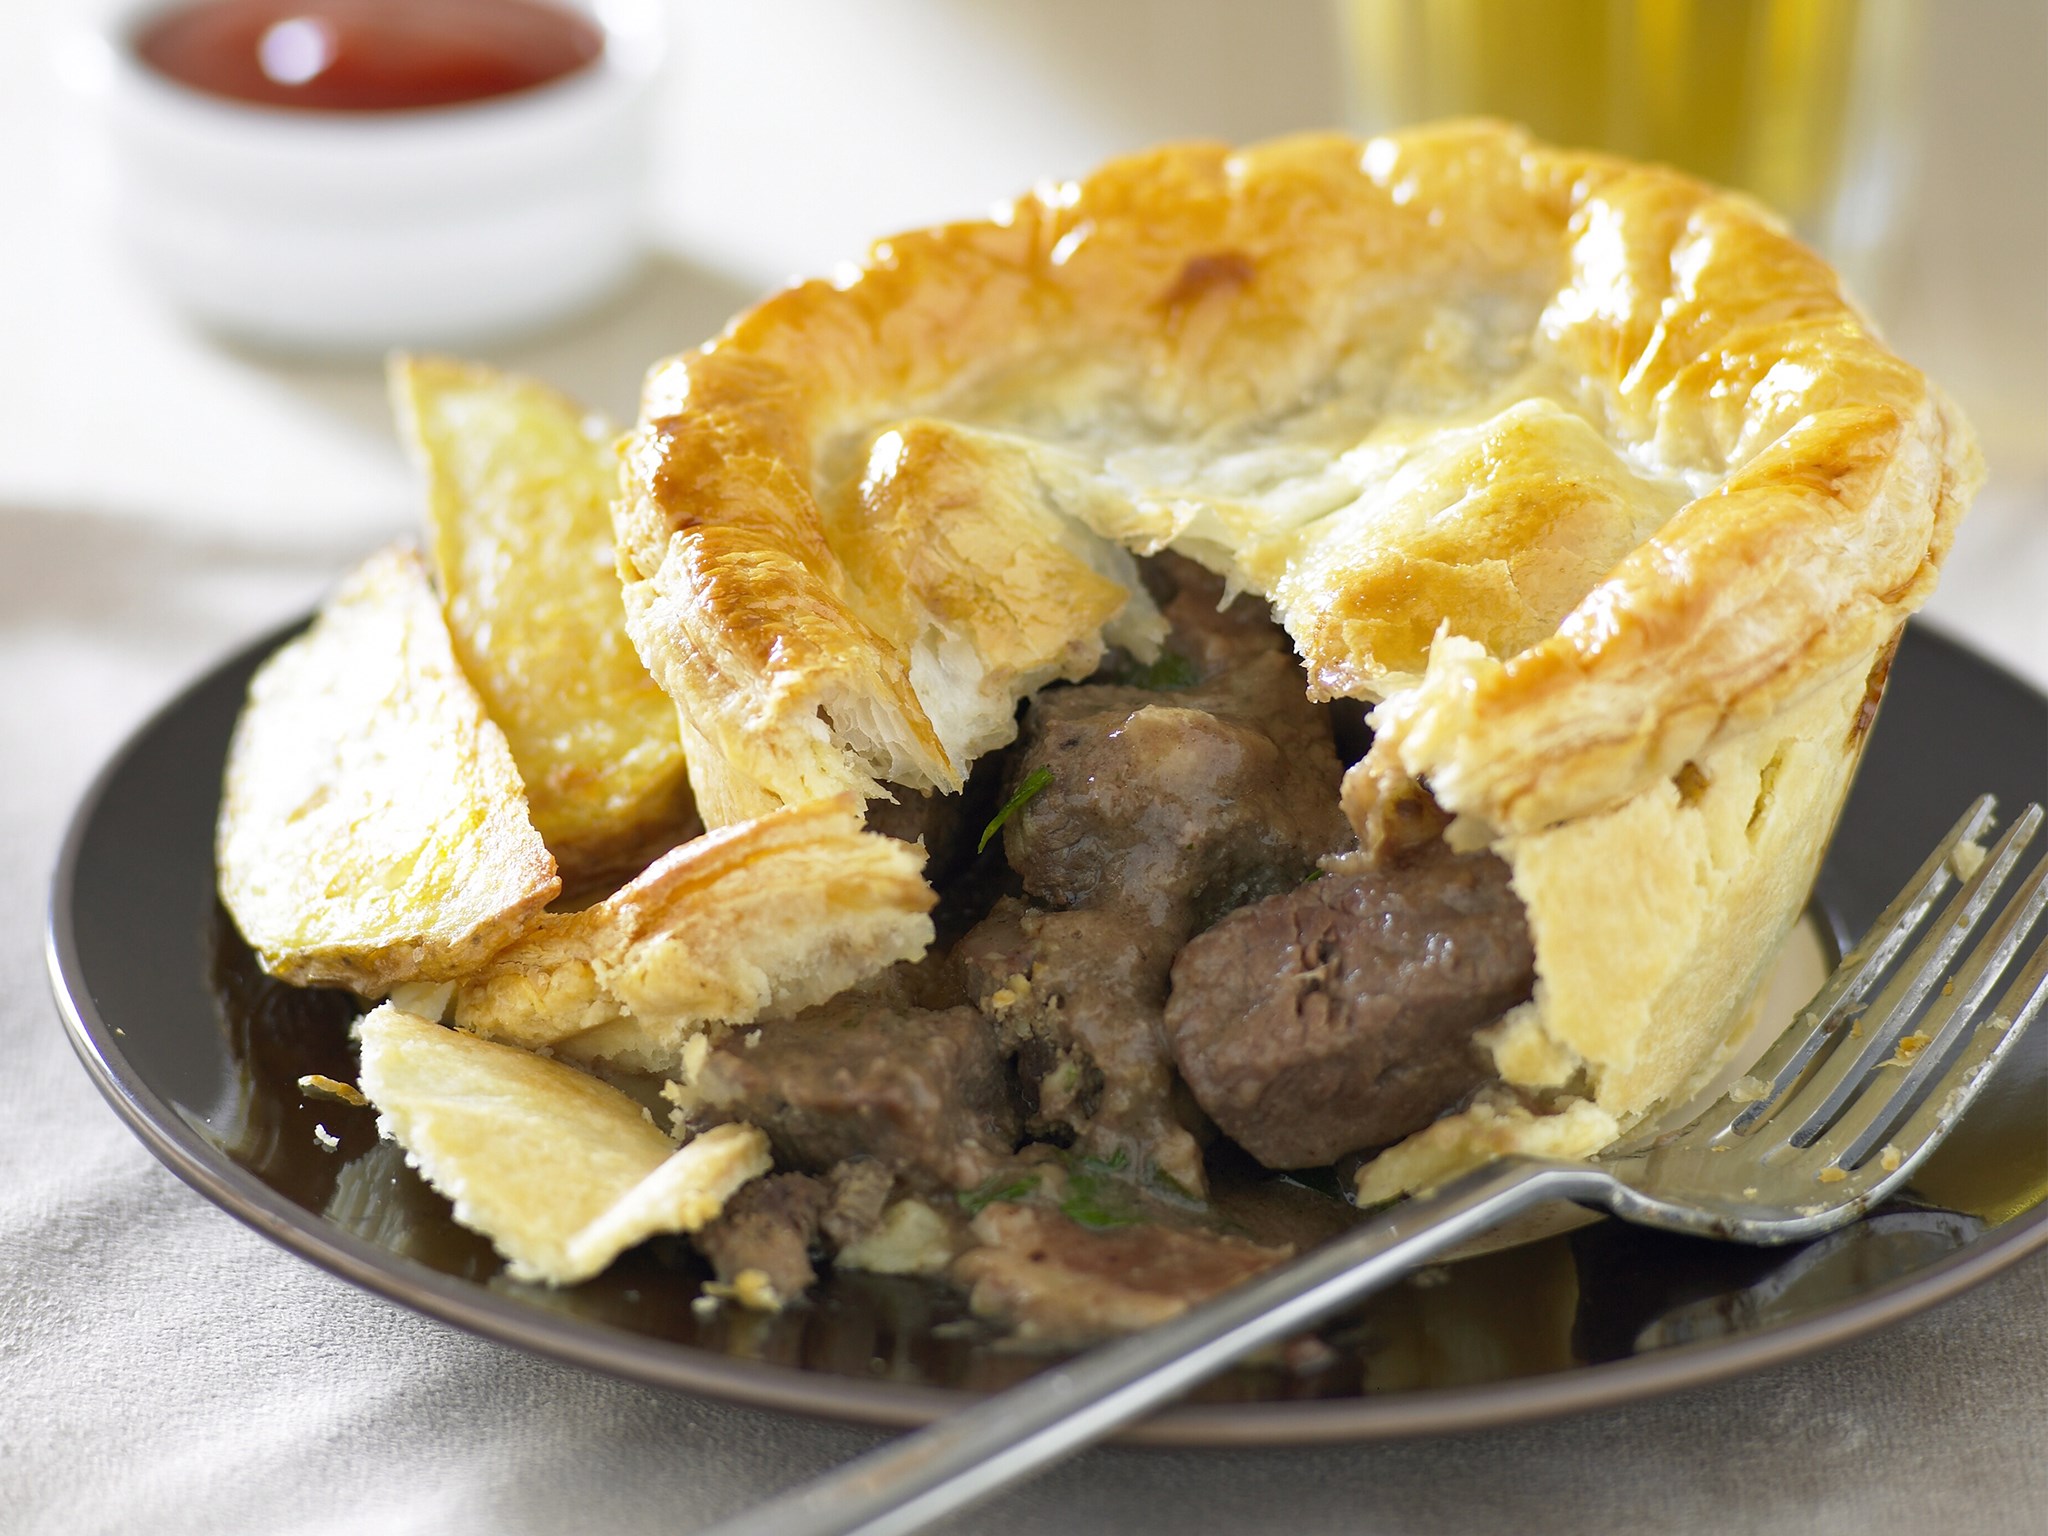 Steak and kidney pies recipe | FOOD TO LOVE